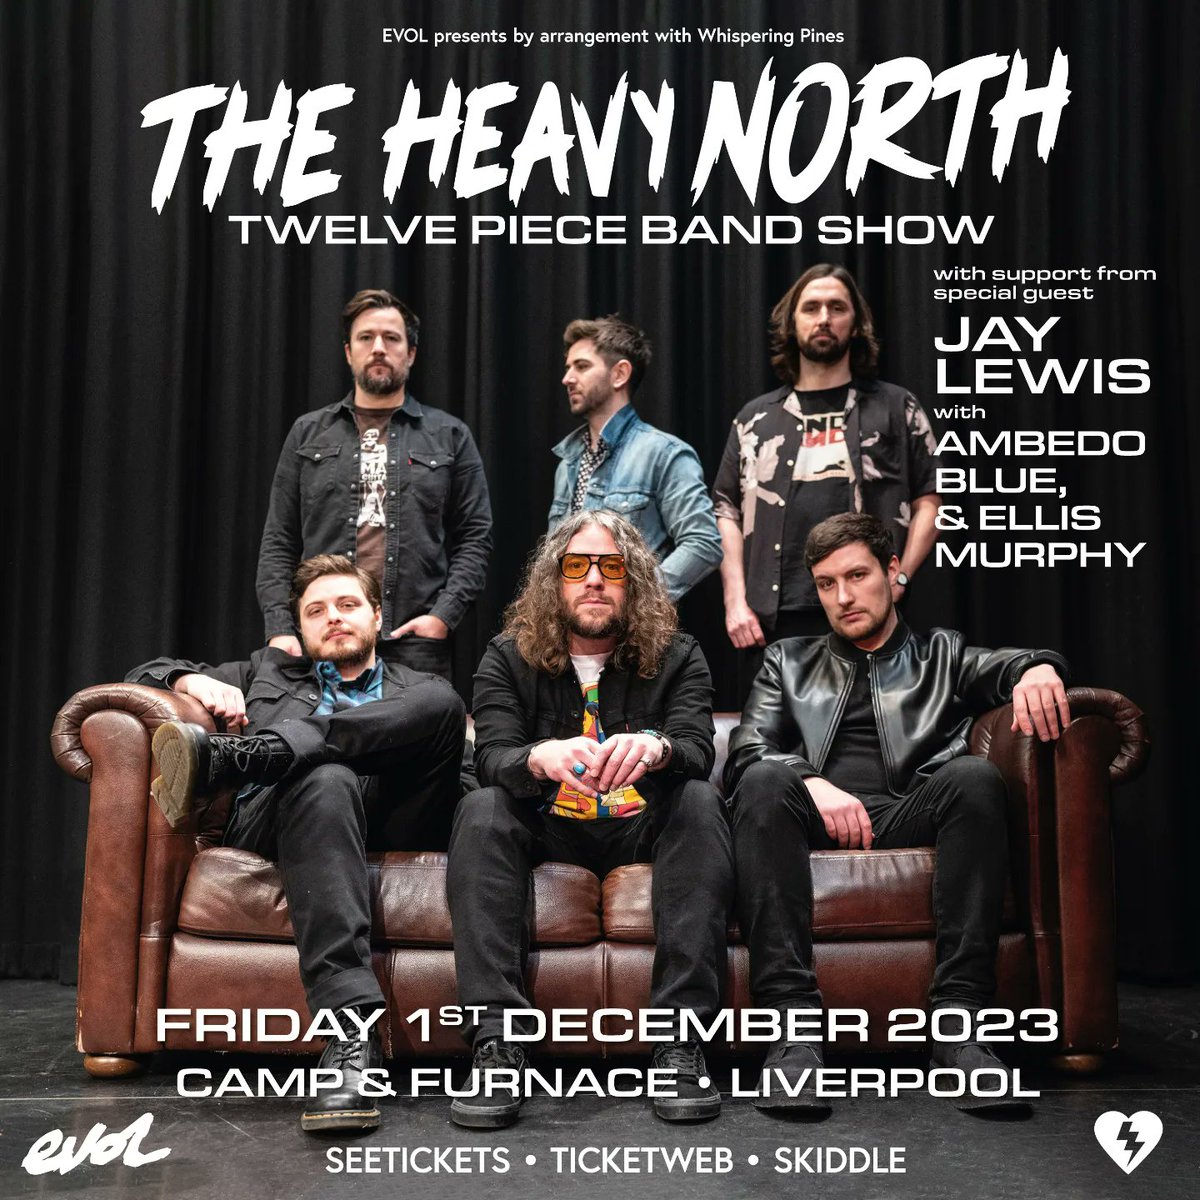 ***ANNOUNCEMENT*** Delighted to unveil the full bill for @theheavynorth's 12 piece band #DeltaShakedown show Friday December 1st @CampandFurnace where they will be joined by special guest @JamesJayLewis along with @Ambedo_Blue and @ellismurphy04. Big. TIX: seetickets.com/event/the-heav…